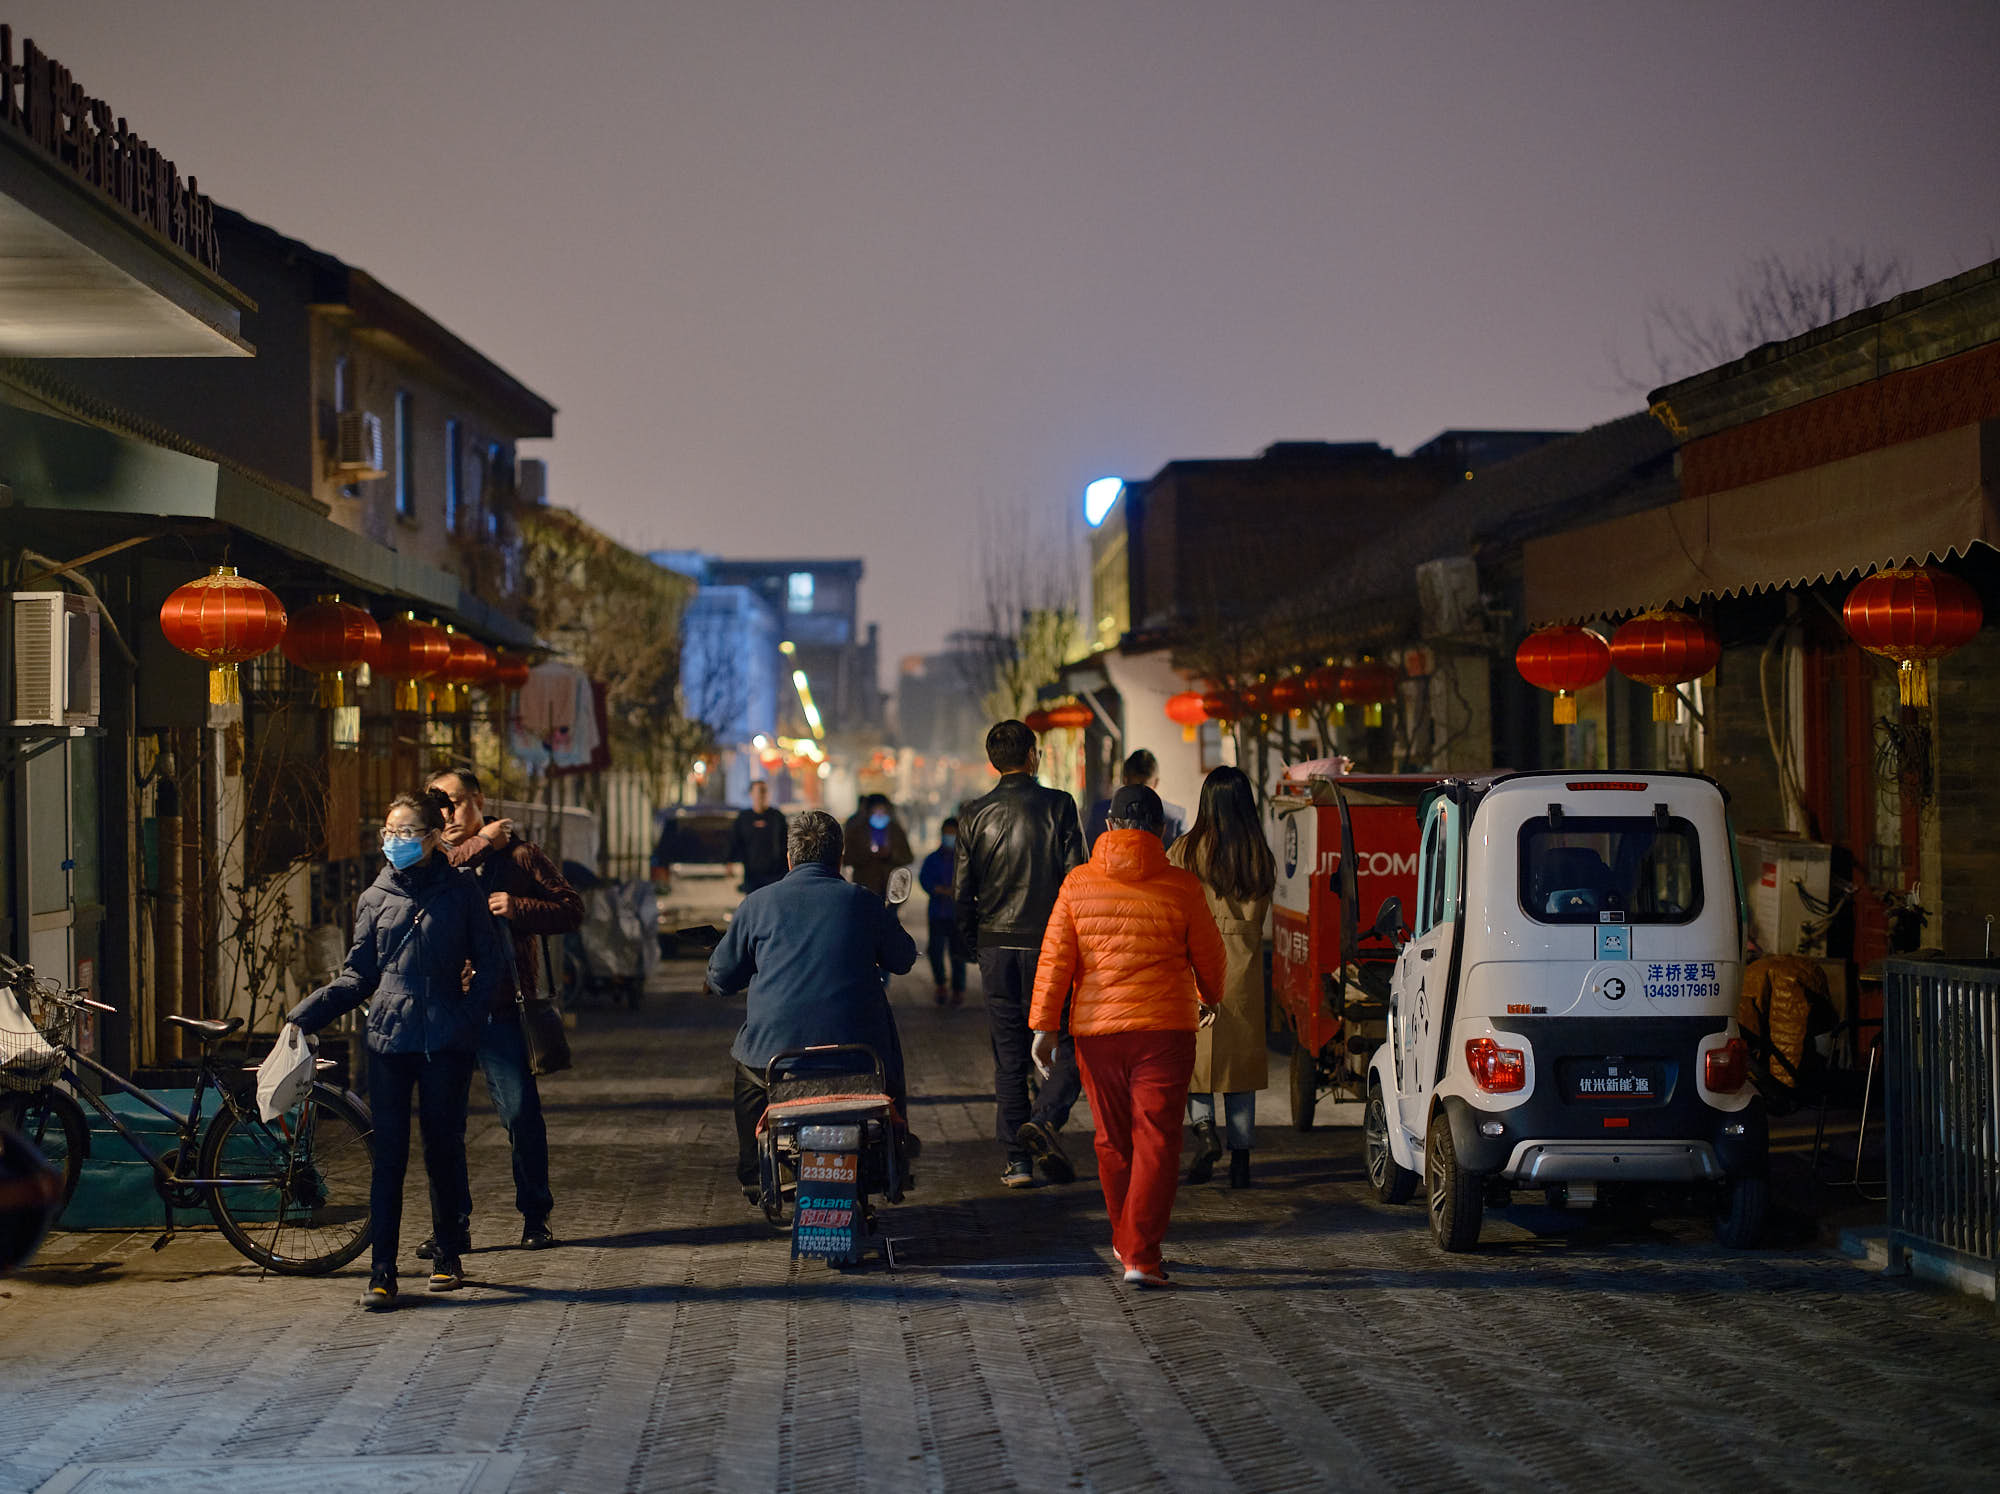 Daily life at night in the Beijing Hutongs